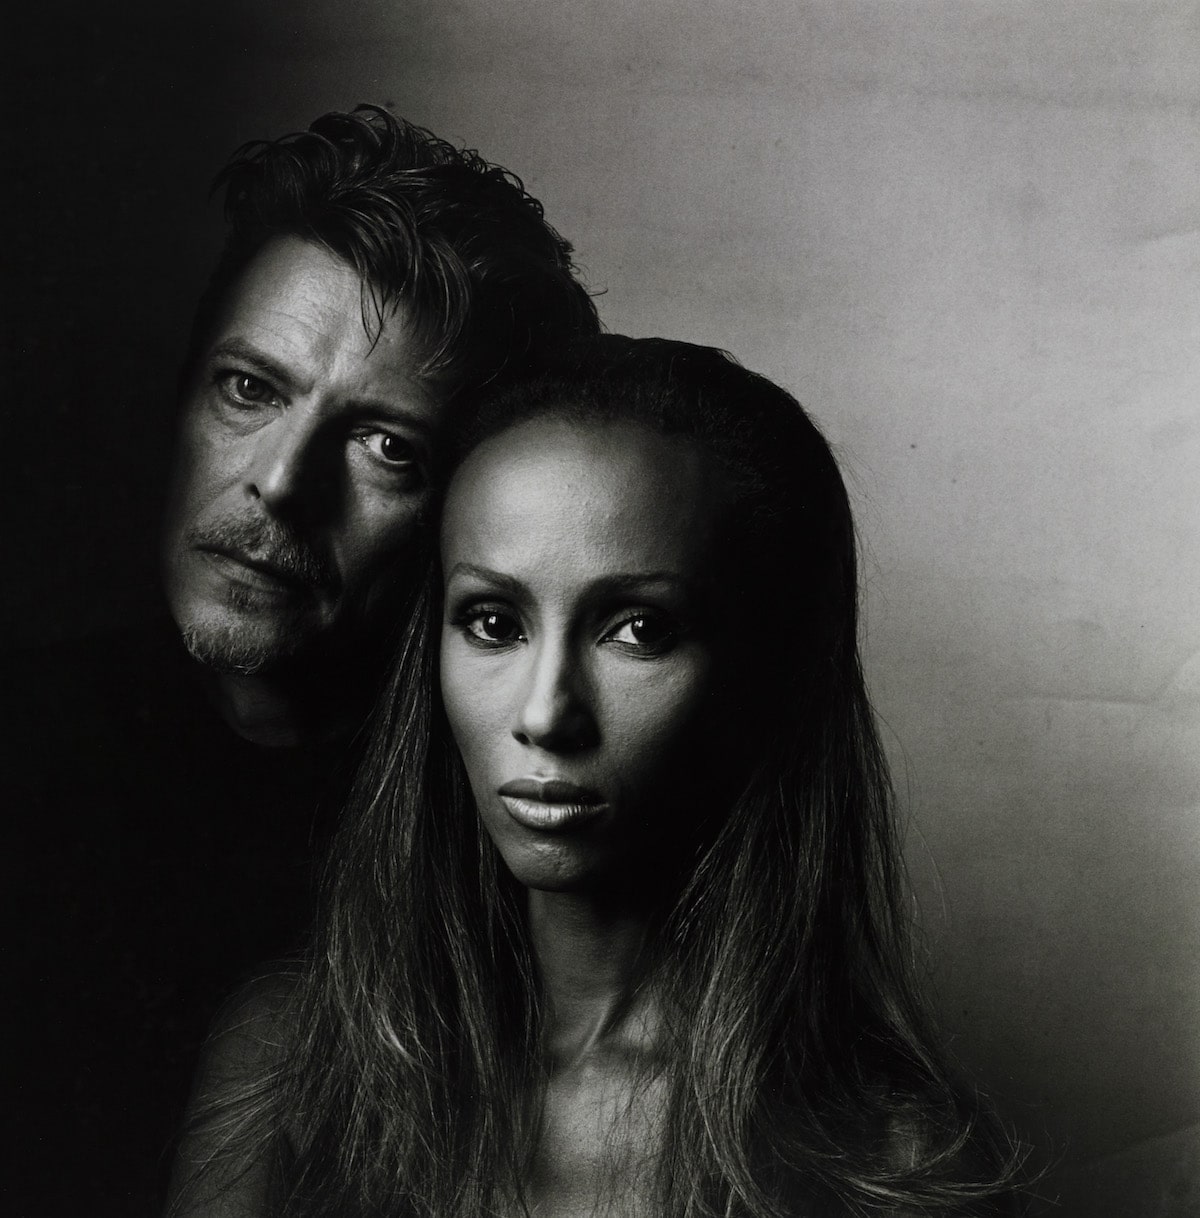 David Bowie and Iman, 1994 © Irving Penn / Condé Nast Pinault Collection